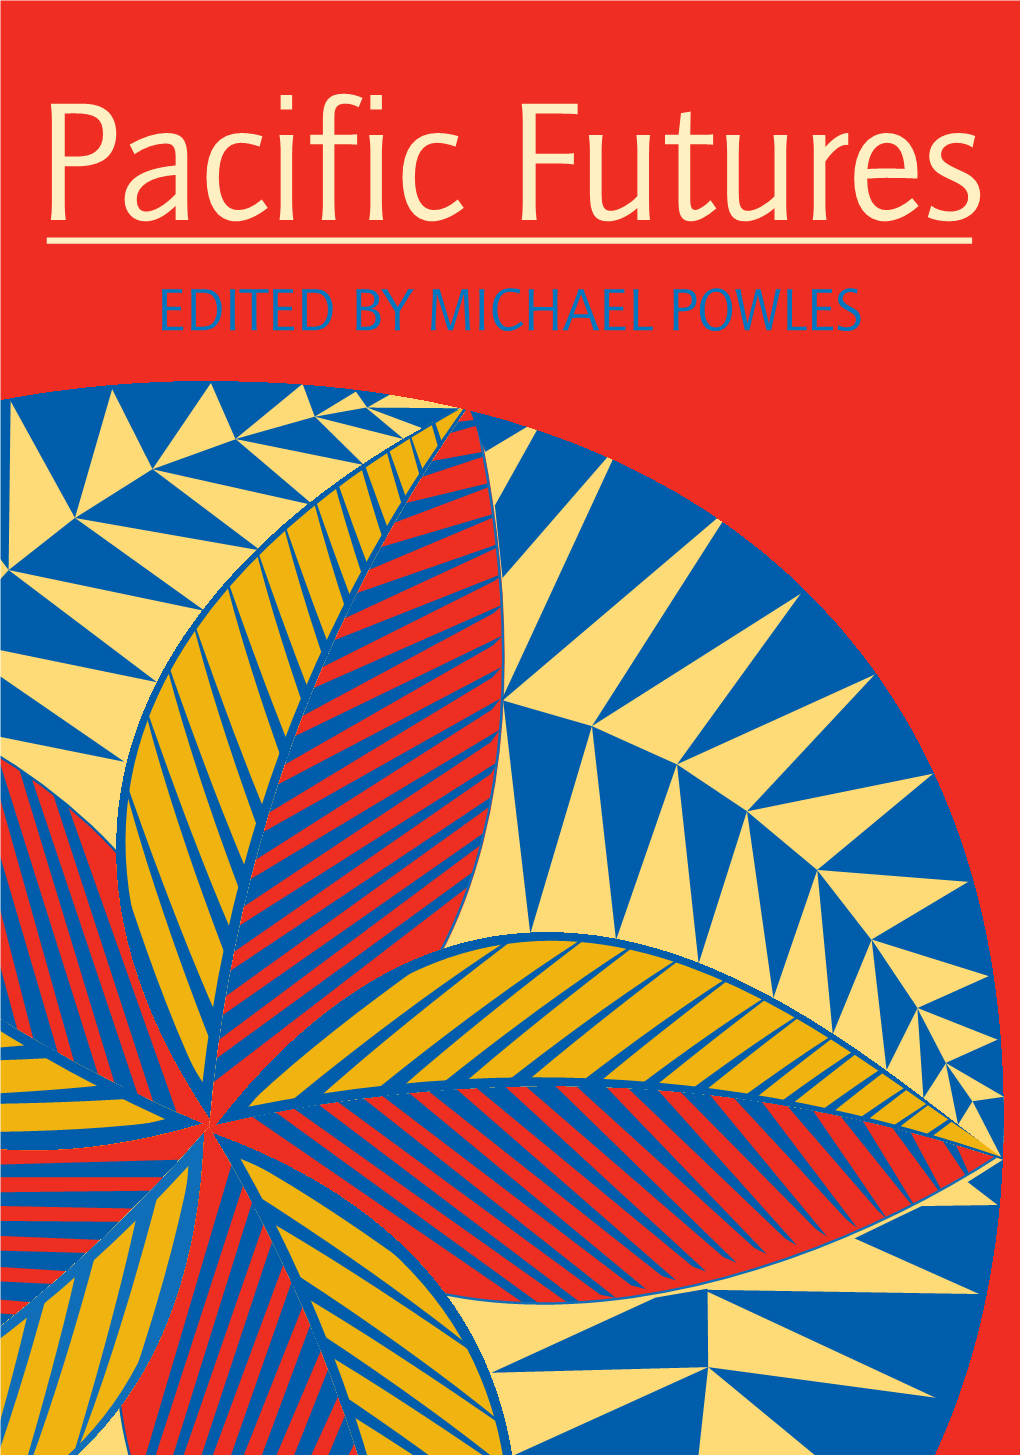 EDITED by MICHAEL POWLES MICHAEL by EDITED Pacific Futures